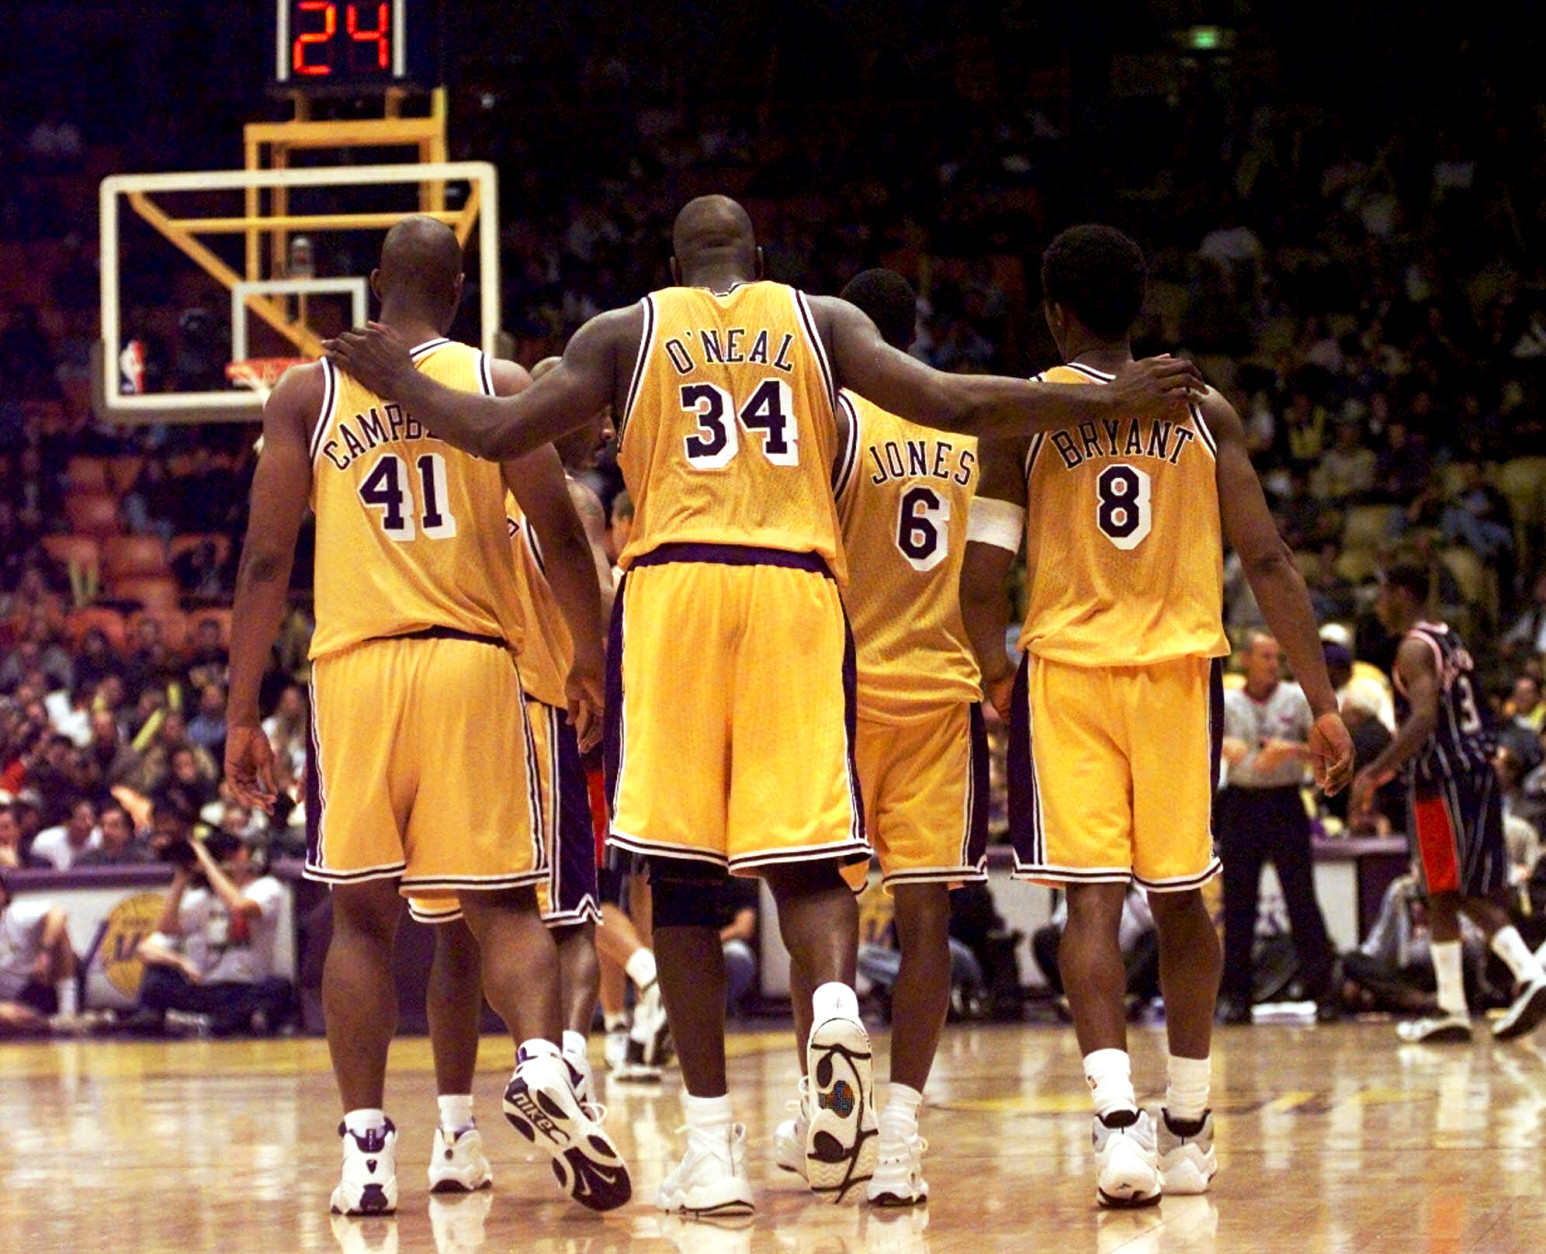 FILE- This Feb. 5, 1999 file photo shows Los Angeles Lakers center Shaquille O'Neal (34) putting his arms around teammates, Elden Campbell (41) and Kobe Bryant (8) as Eddie Jones (6) and Derek Harper walk in front as they return to play the Houston Rockets in the fourth quarter at the Great Western Forum in Inglewood, Calif. O'Neal says on Twitter that he's "about to retire." O'Neal sent a Tweet shortly before 2:45 p.m. saying, "im retiring." It included a link to a 16-second video in which he says, "We did it; 19 years, baby. Thank you very much. That's why I'm telling you first: I'm about to retire. Love you. Talk to you soon." (AP Photo/ Victoria Arocho,File)